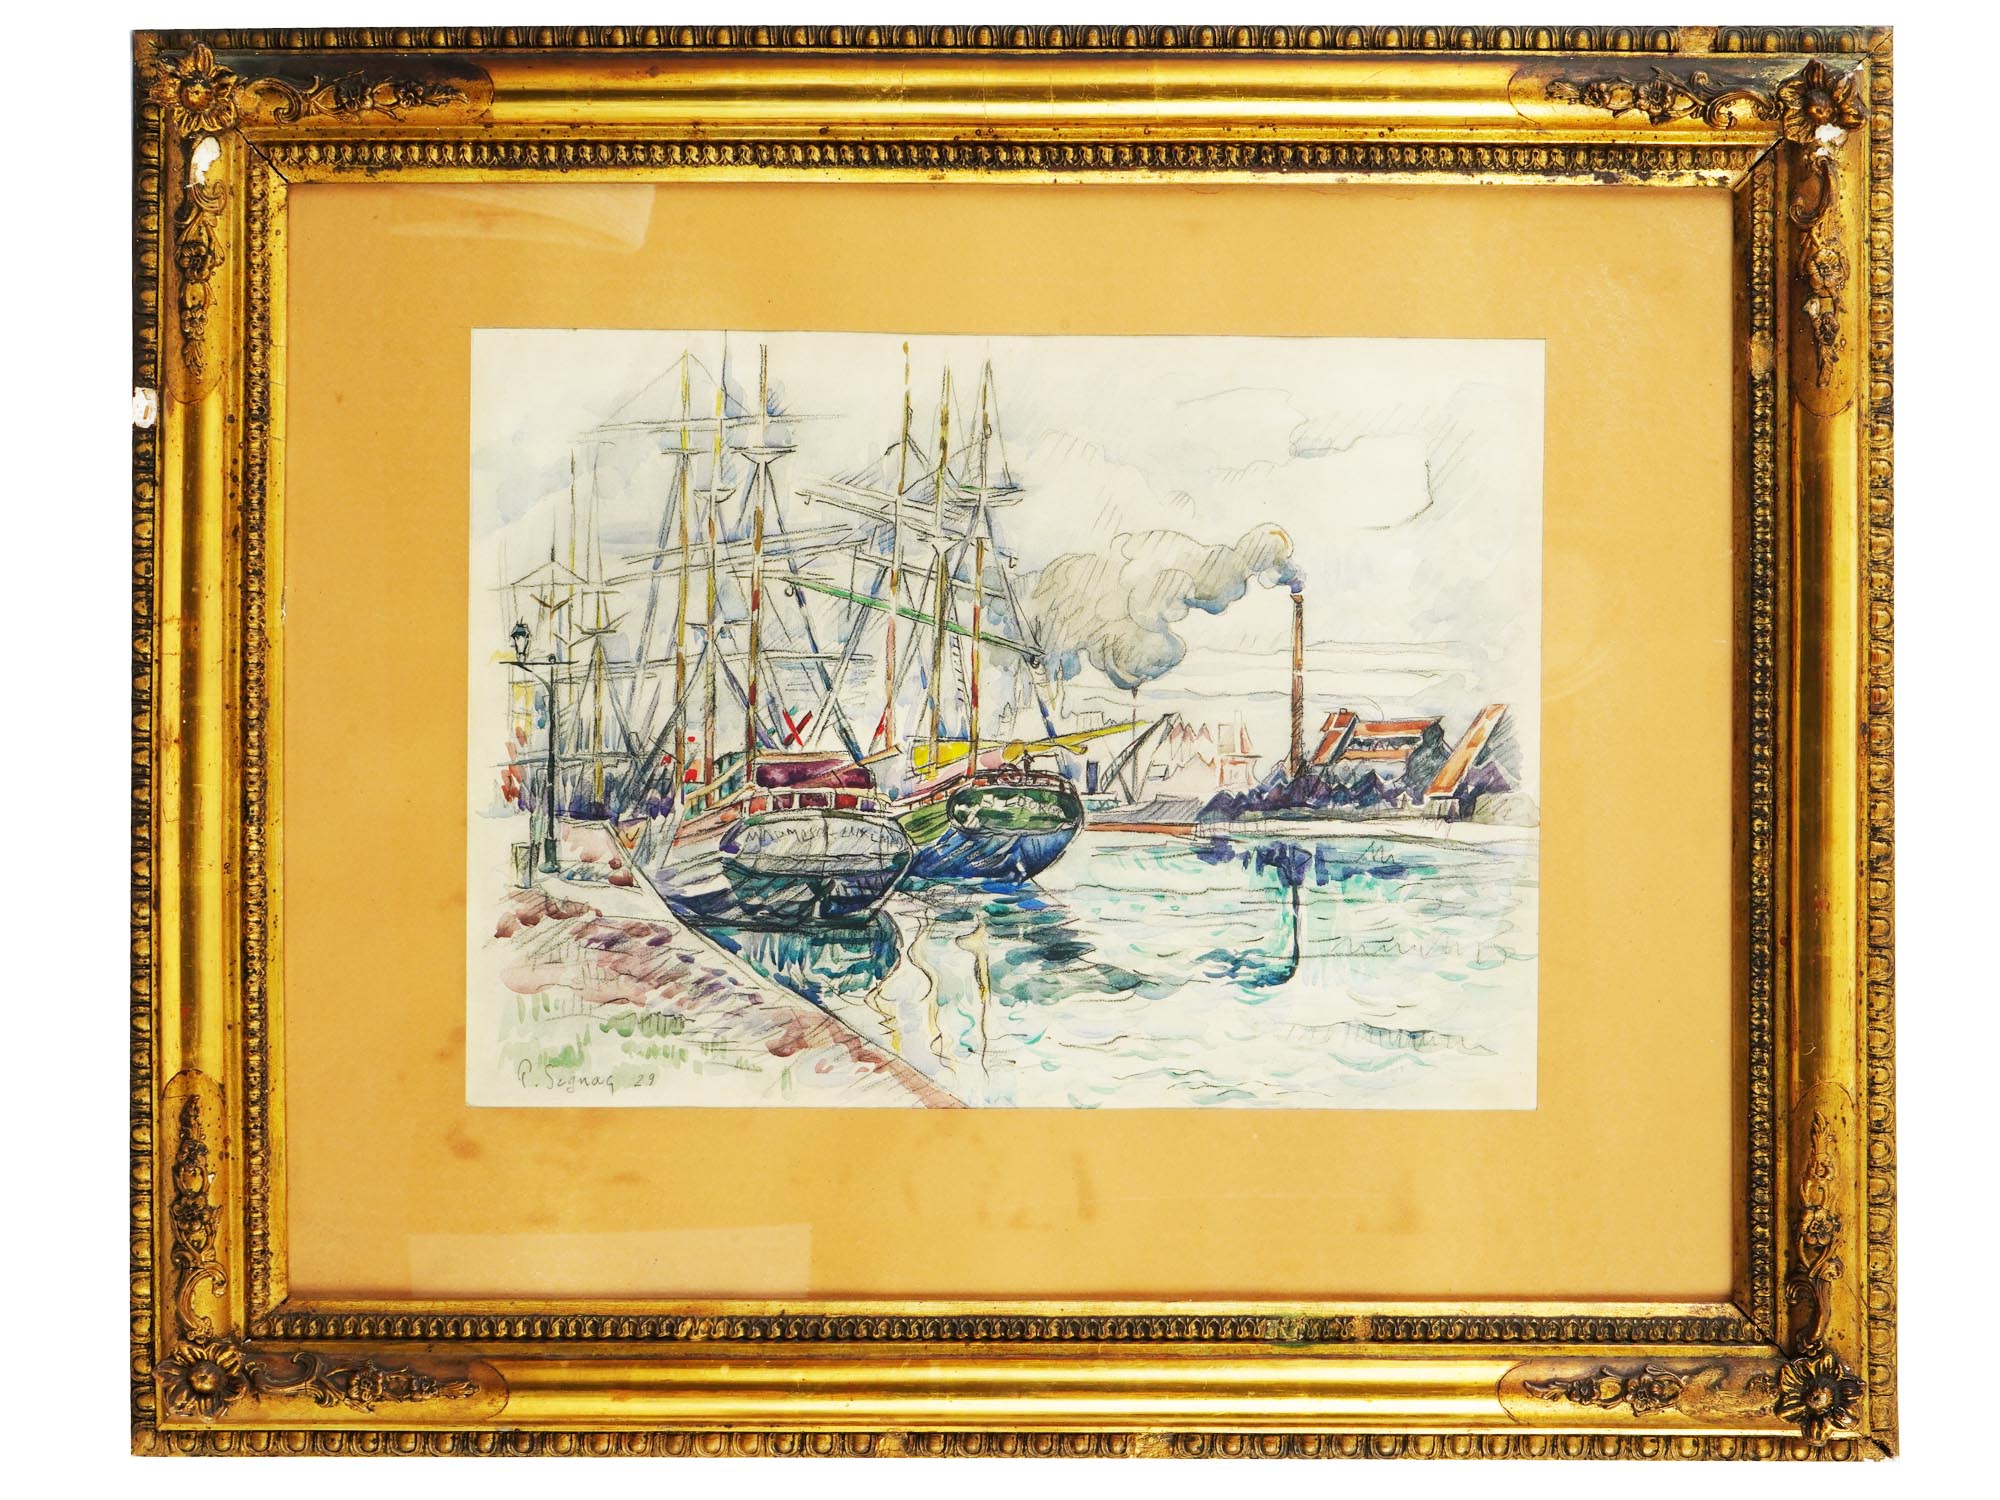 FRENCH NAUTICAL LANDSCAPE PAINTING BY PAUL SIGNAC PIC-0